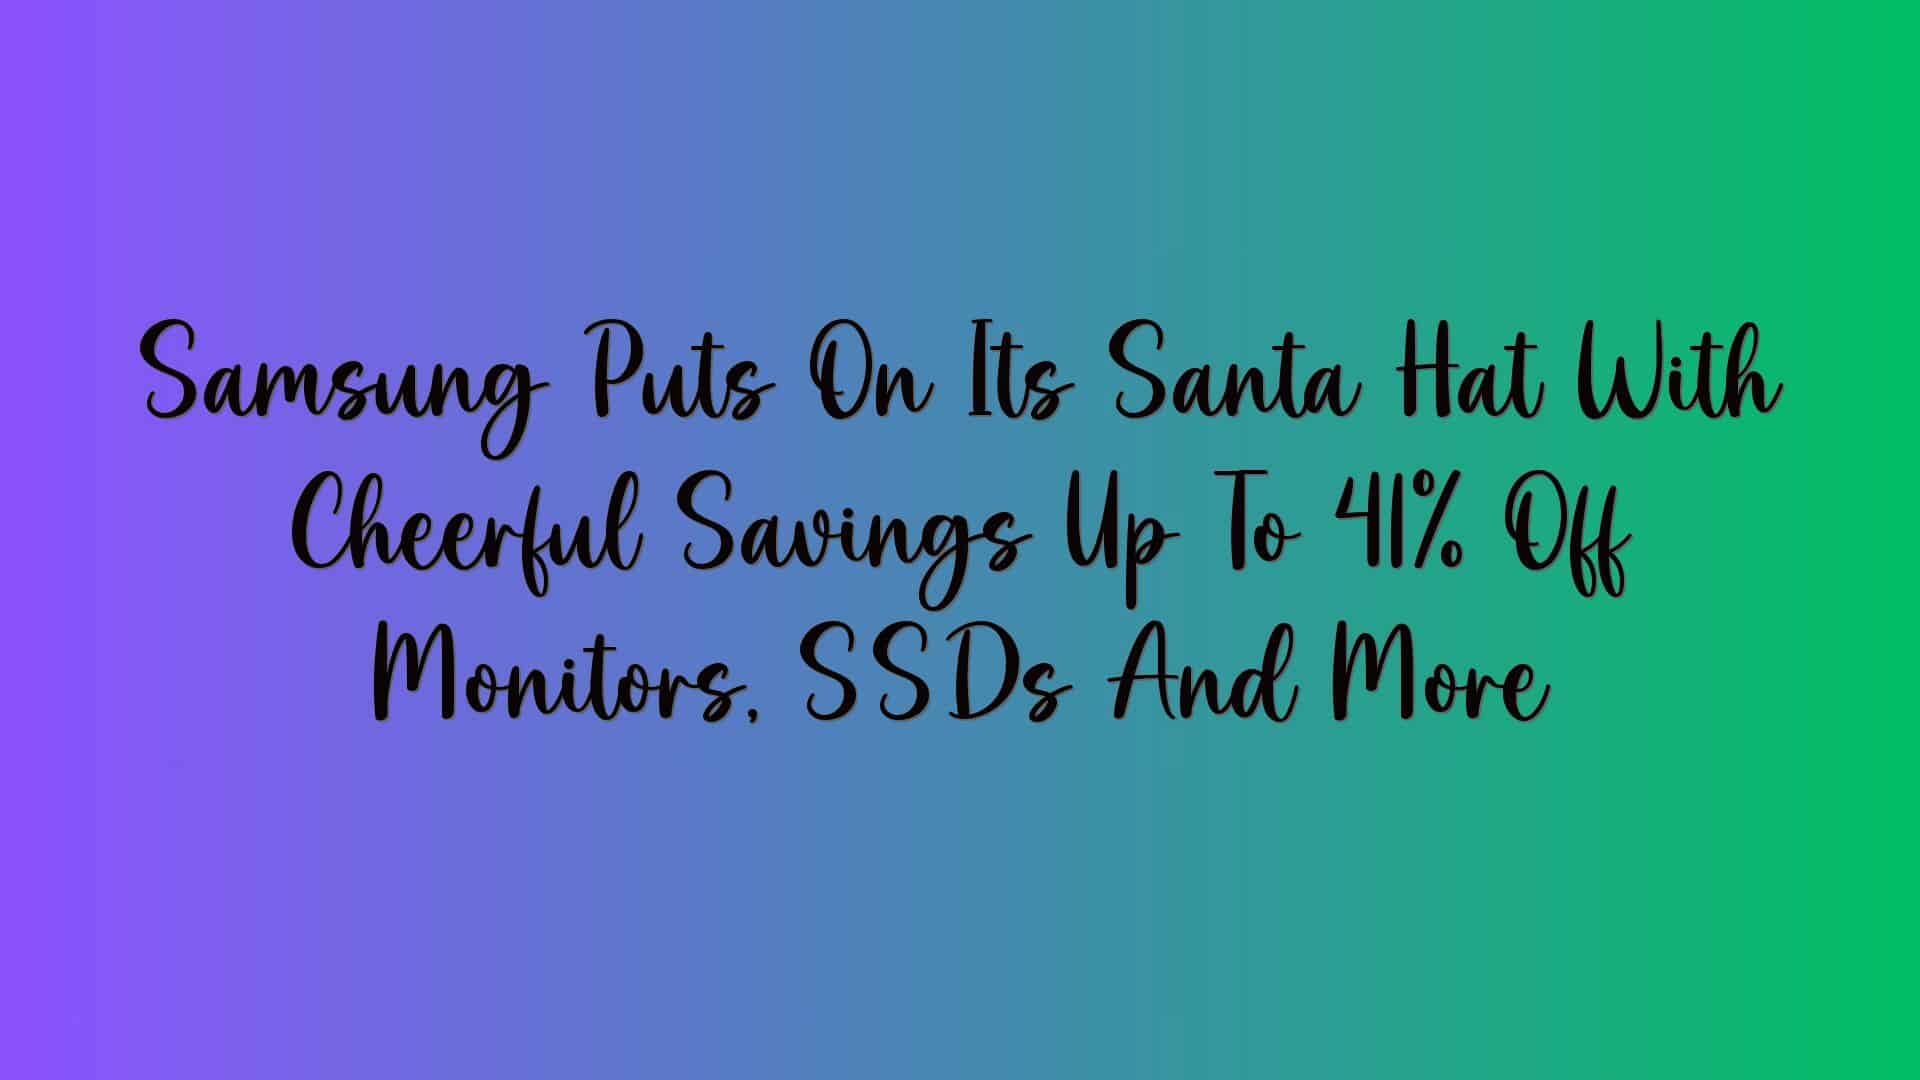 Samsung Puts On Its Santa Hat With Cheerful Savings Up To 41% Off Monitors, SSDs And More